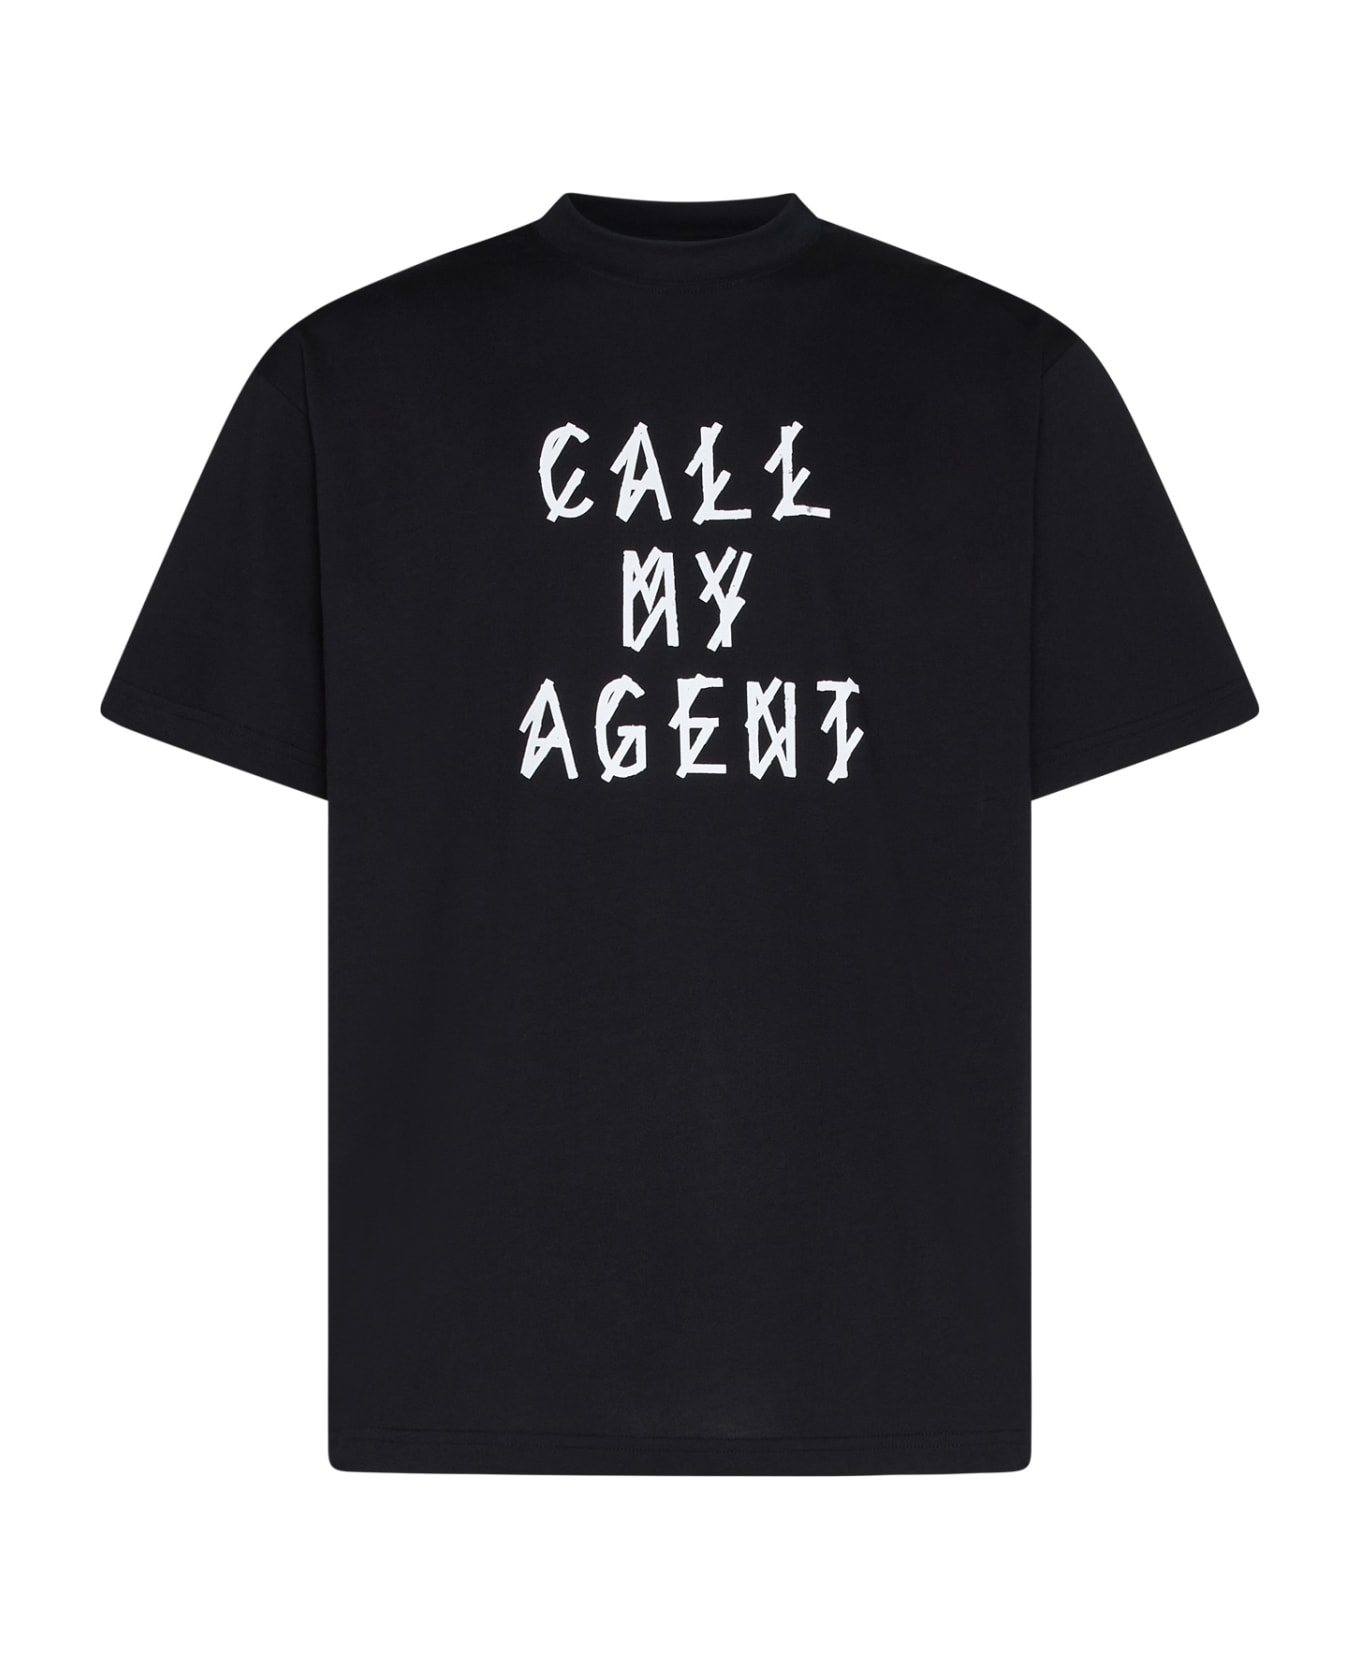 44 Label Group T-Shirt - Black+call my agent